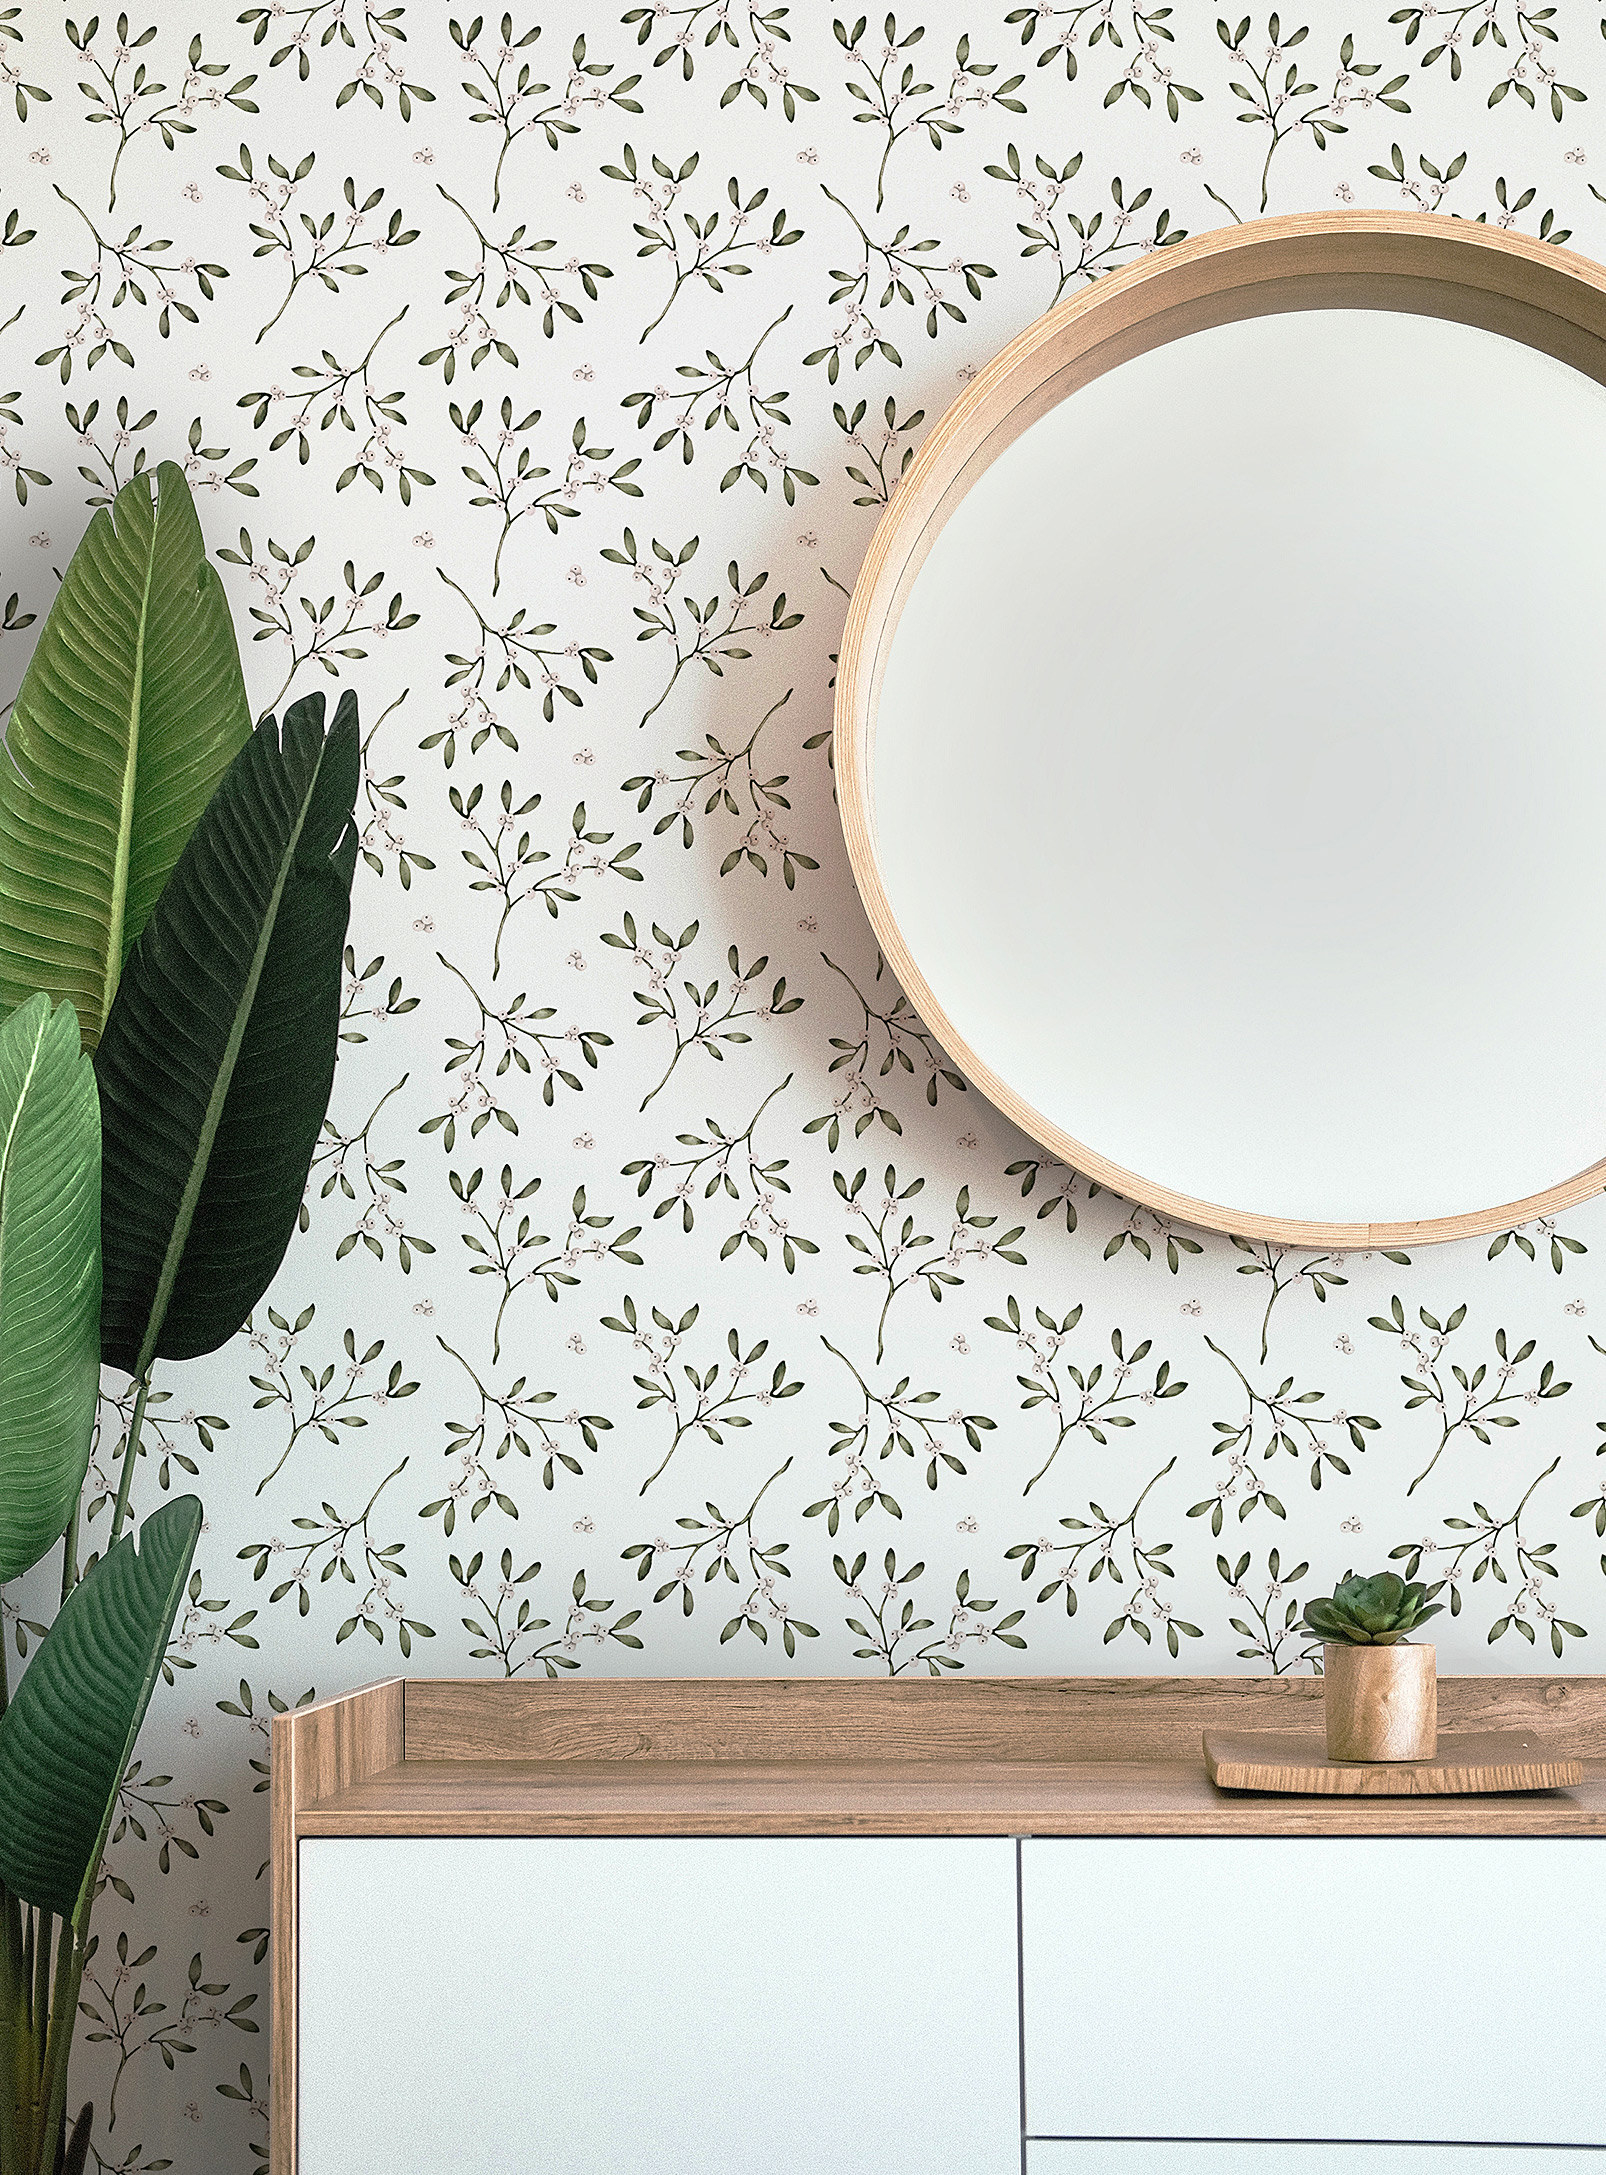 The wallpaper up on a wall behind a dresser, a plant, and a round mirror